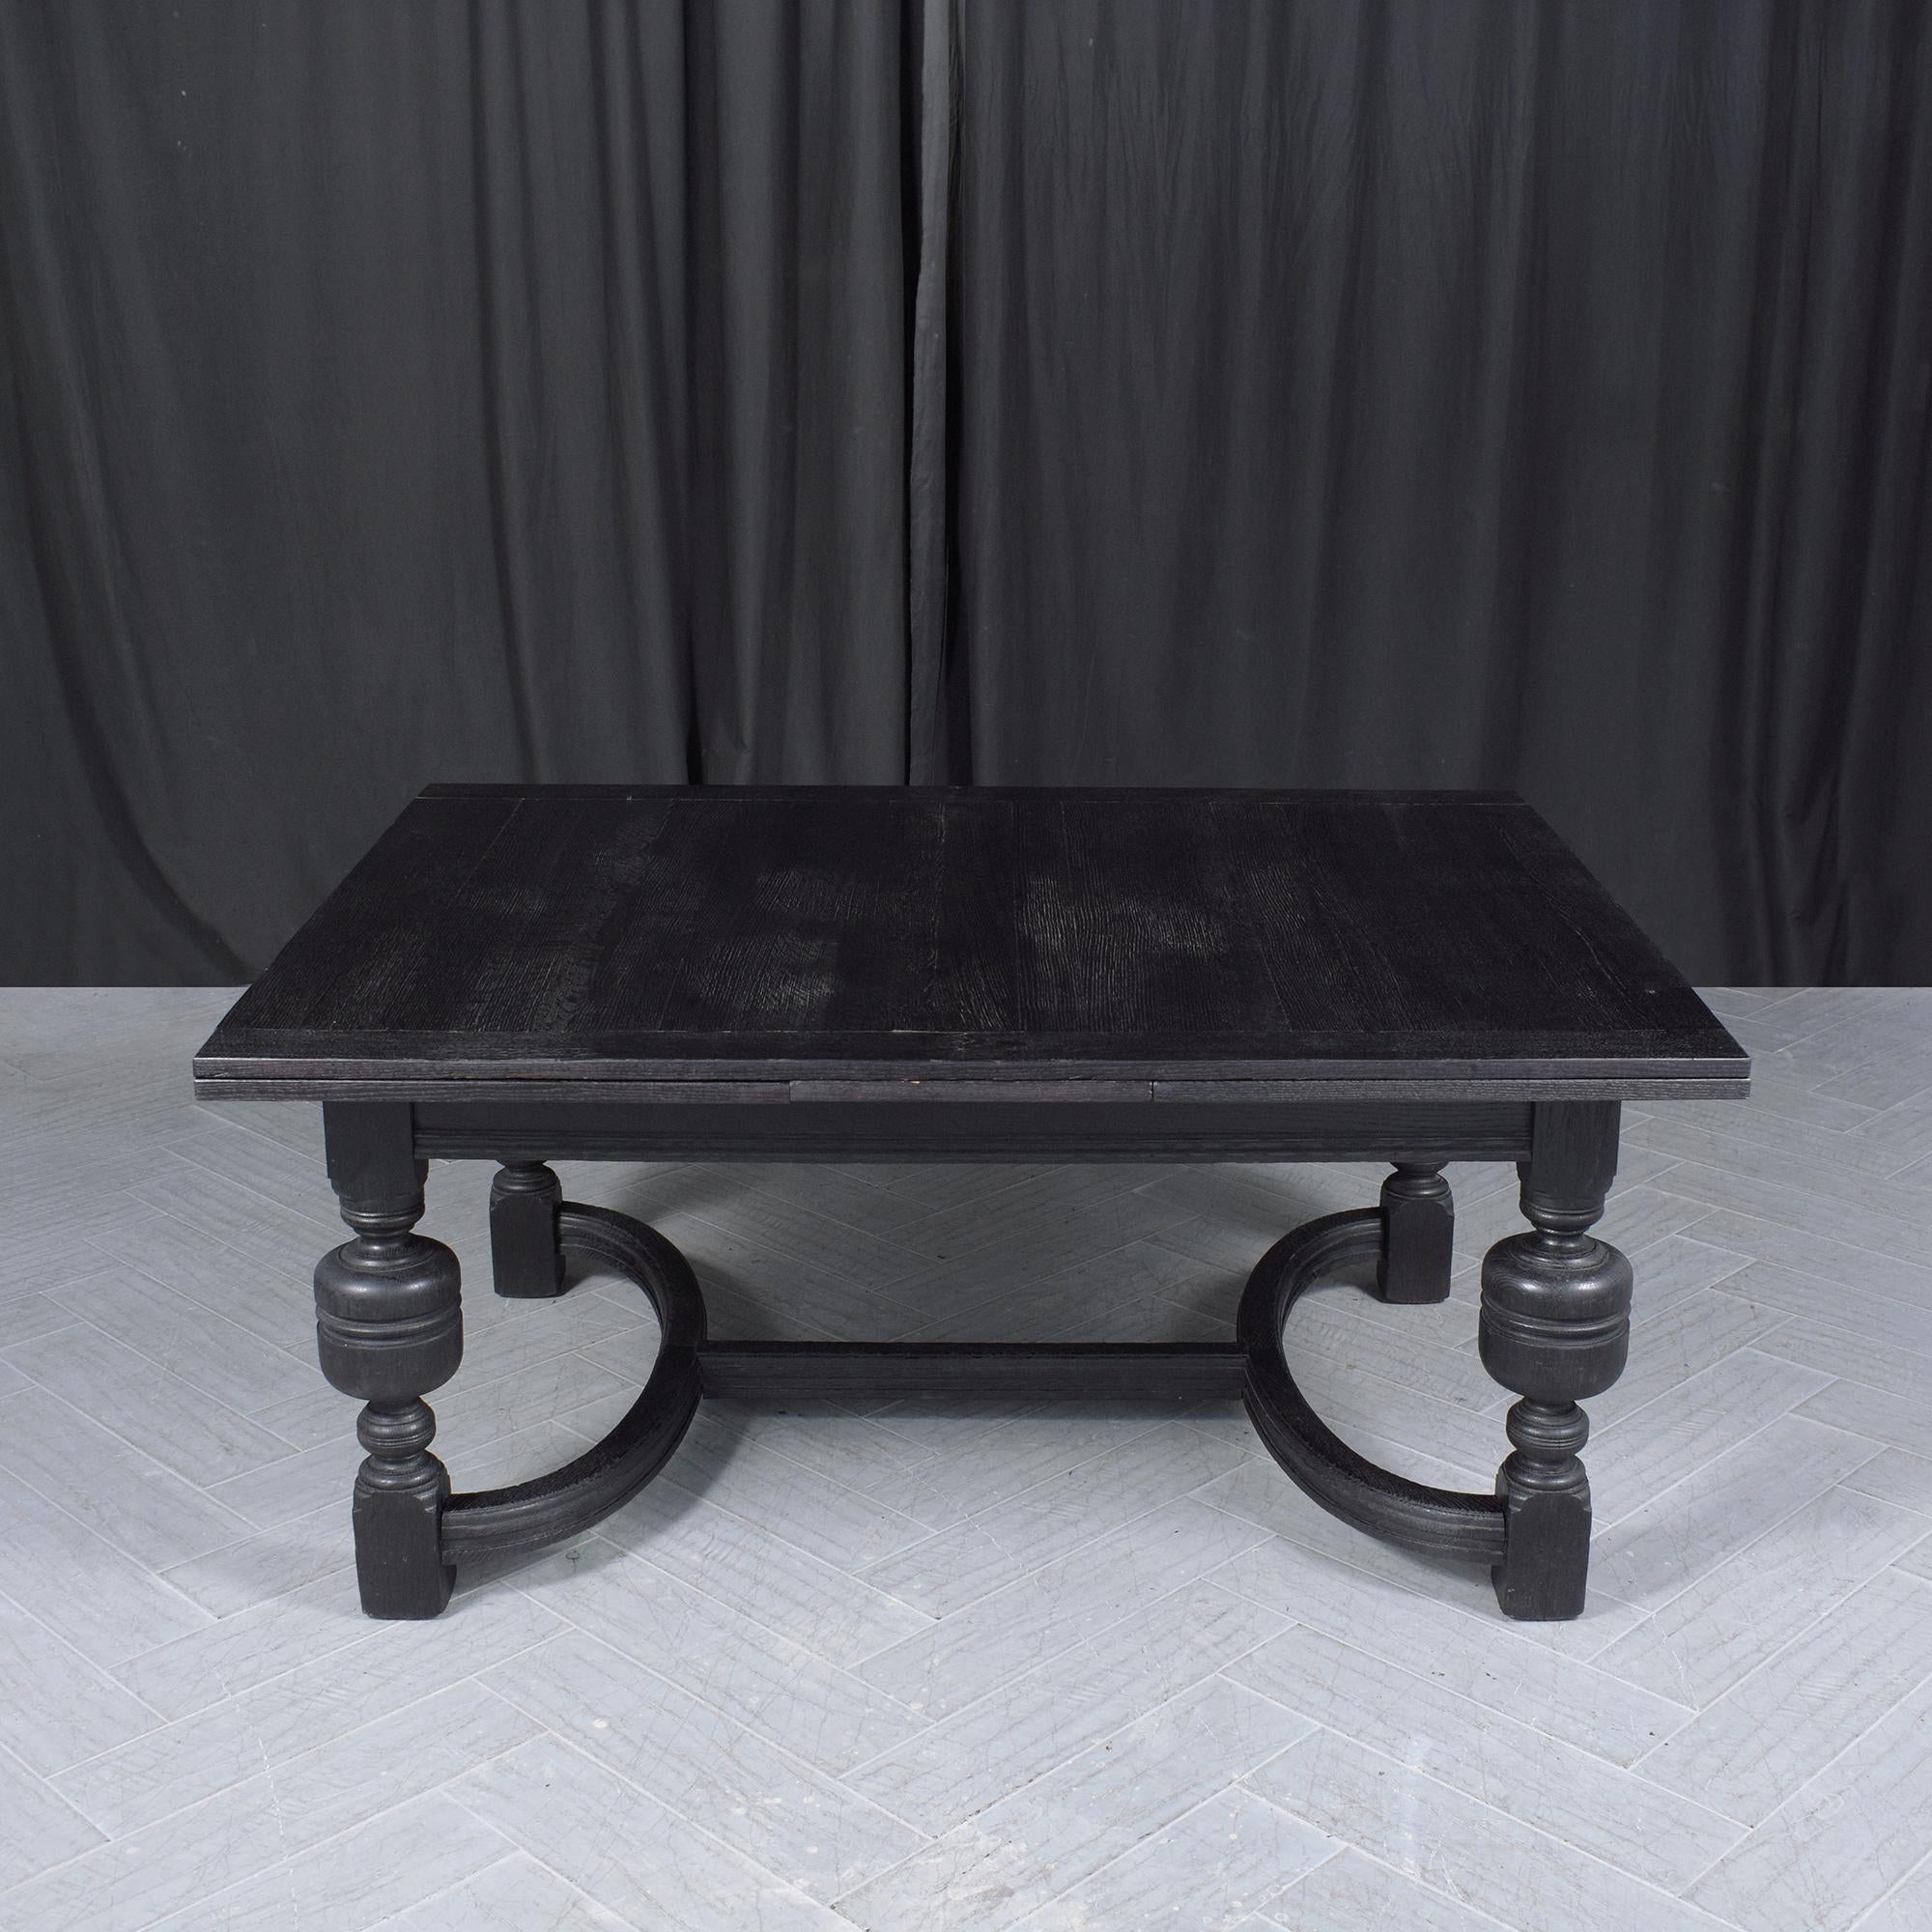 Spanish Colonial 1850s Spanish Extendable Dining Table: Ebonized Solid Wood with French Design For Sale